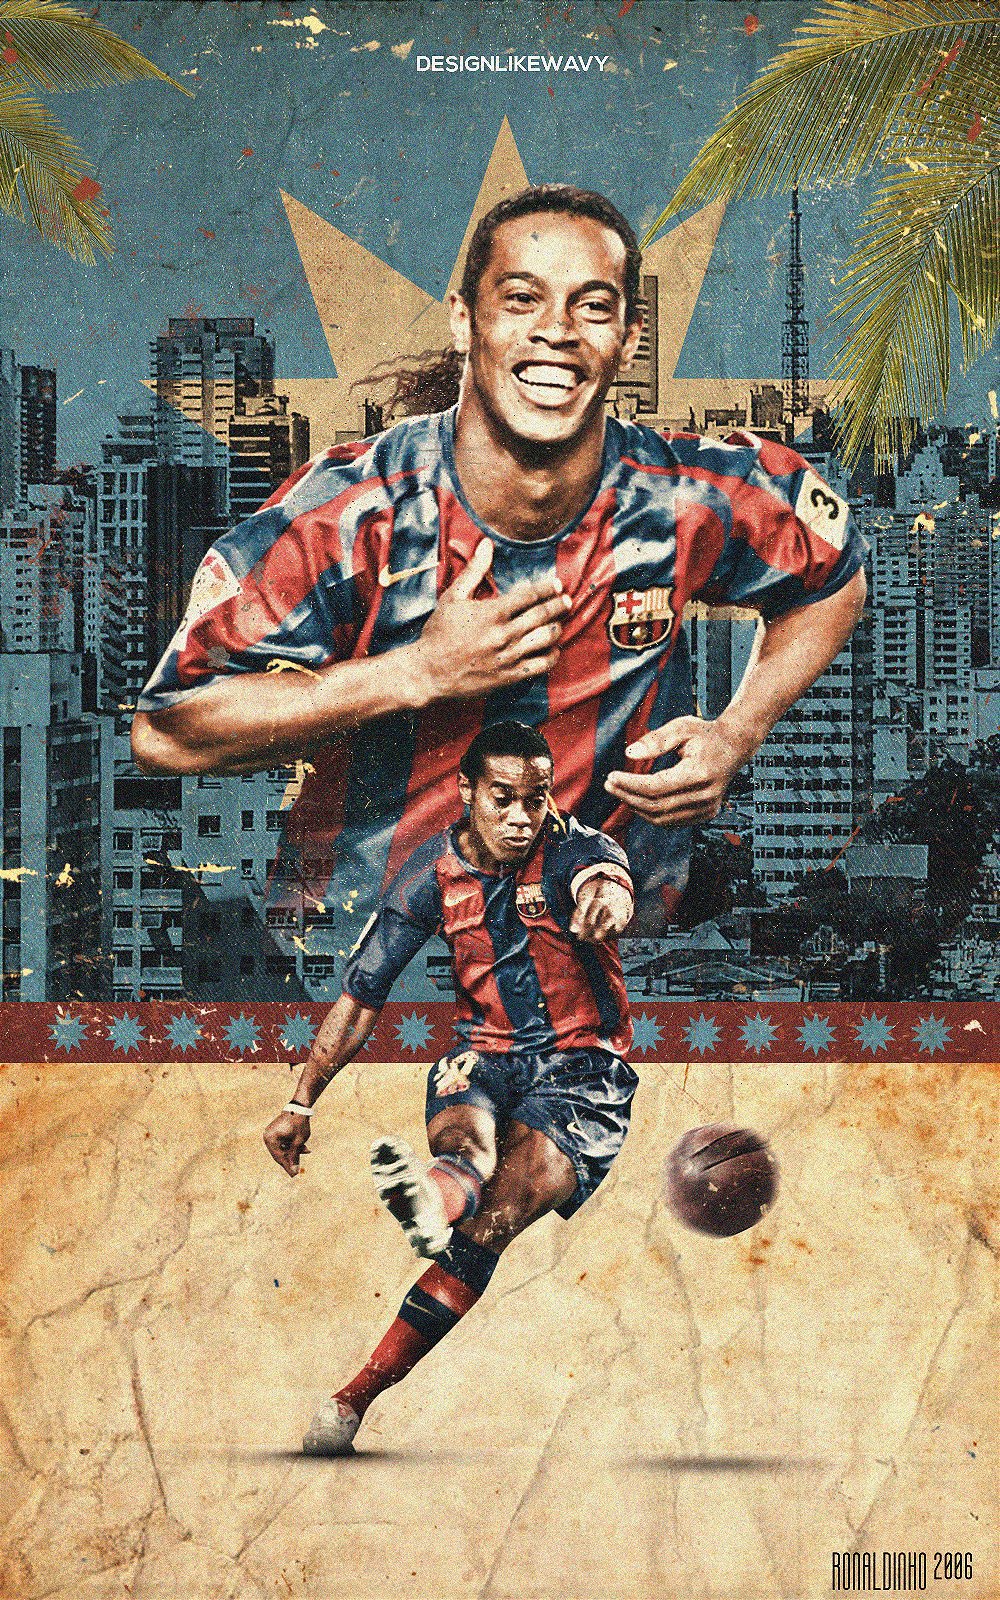 chase💫 on Twitter: "Ronaldinho Poster/Wallpaper! (Fantastic Flashbacks Series) All Retweets and Follows all Highly Appreciated! ❤️ https://t.co/52RiRQ06Jv" Twitter